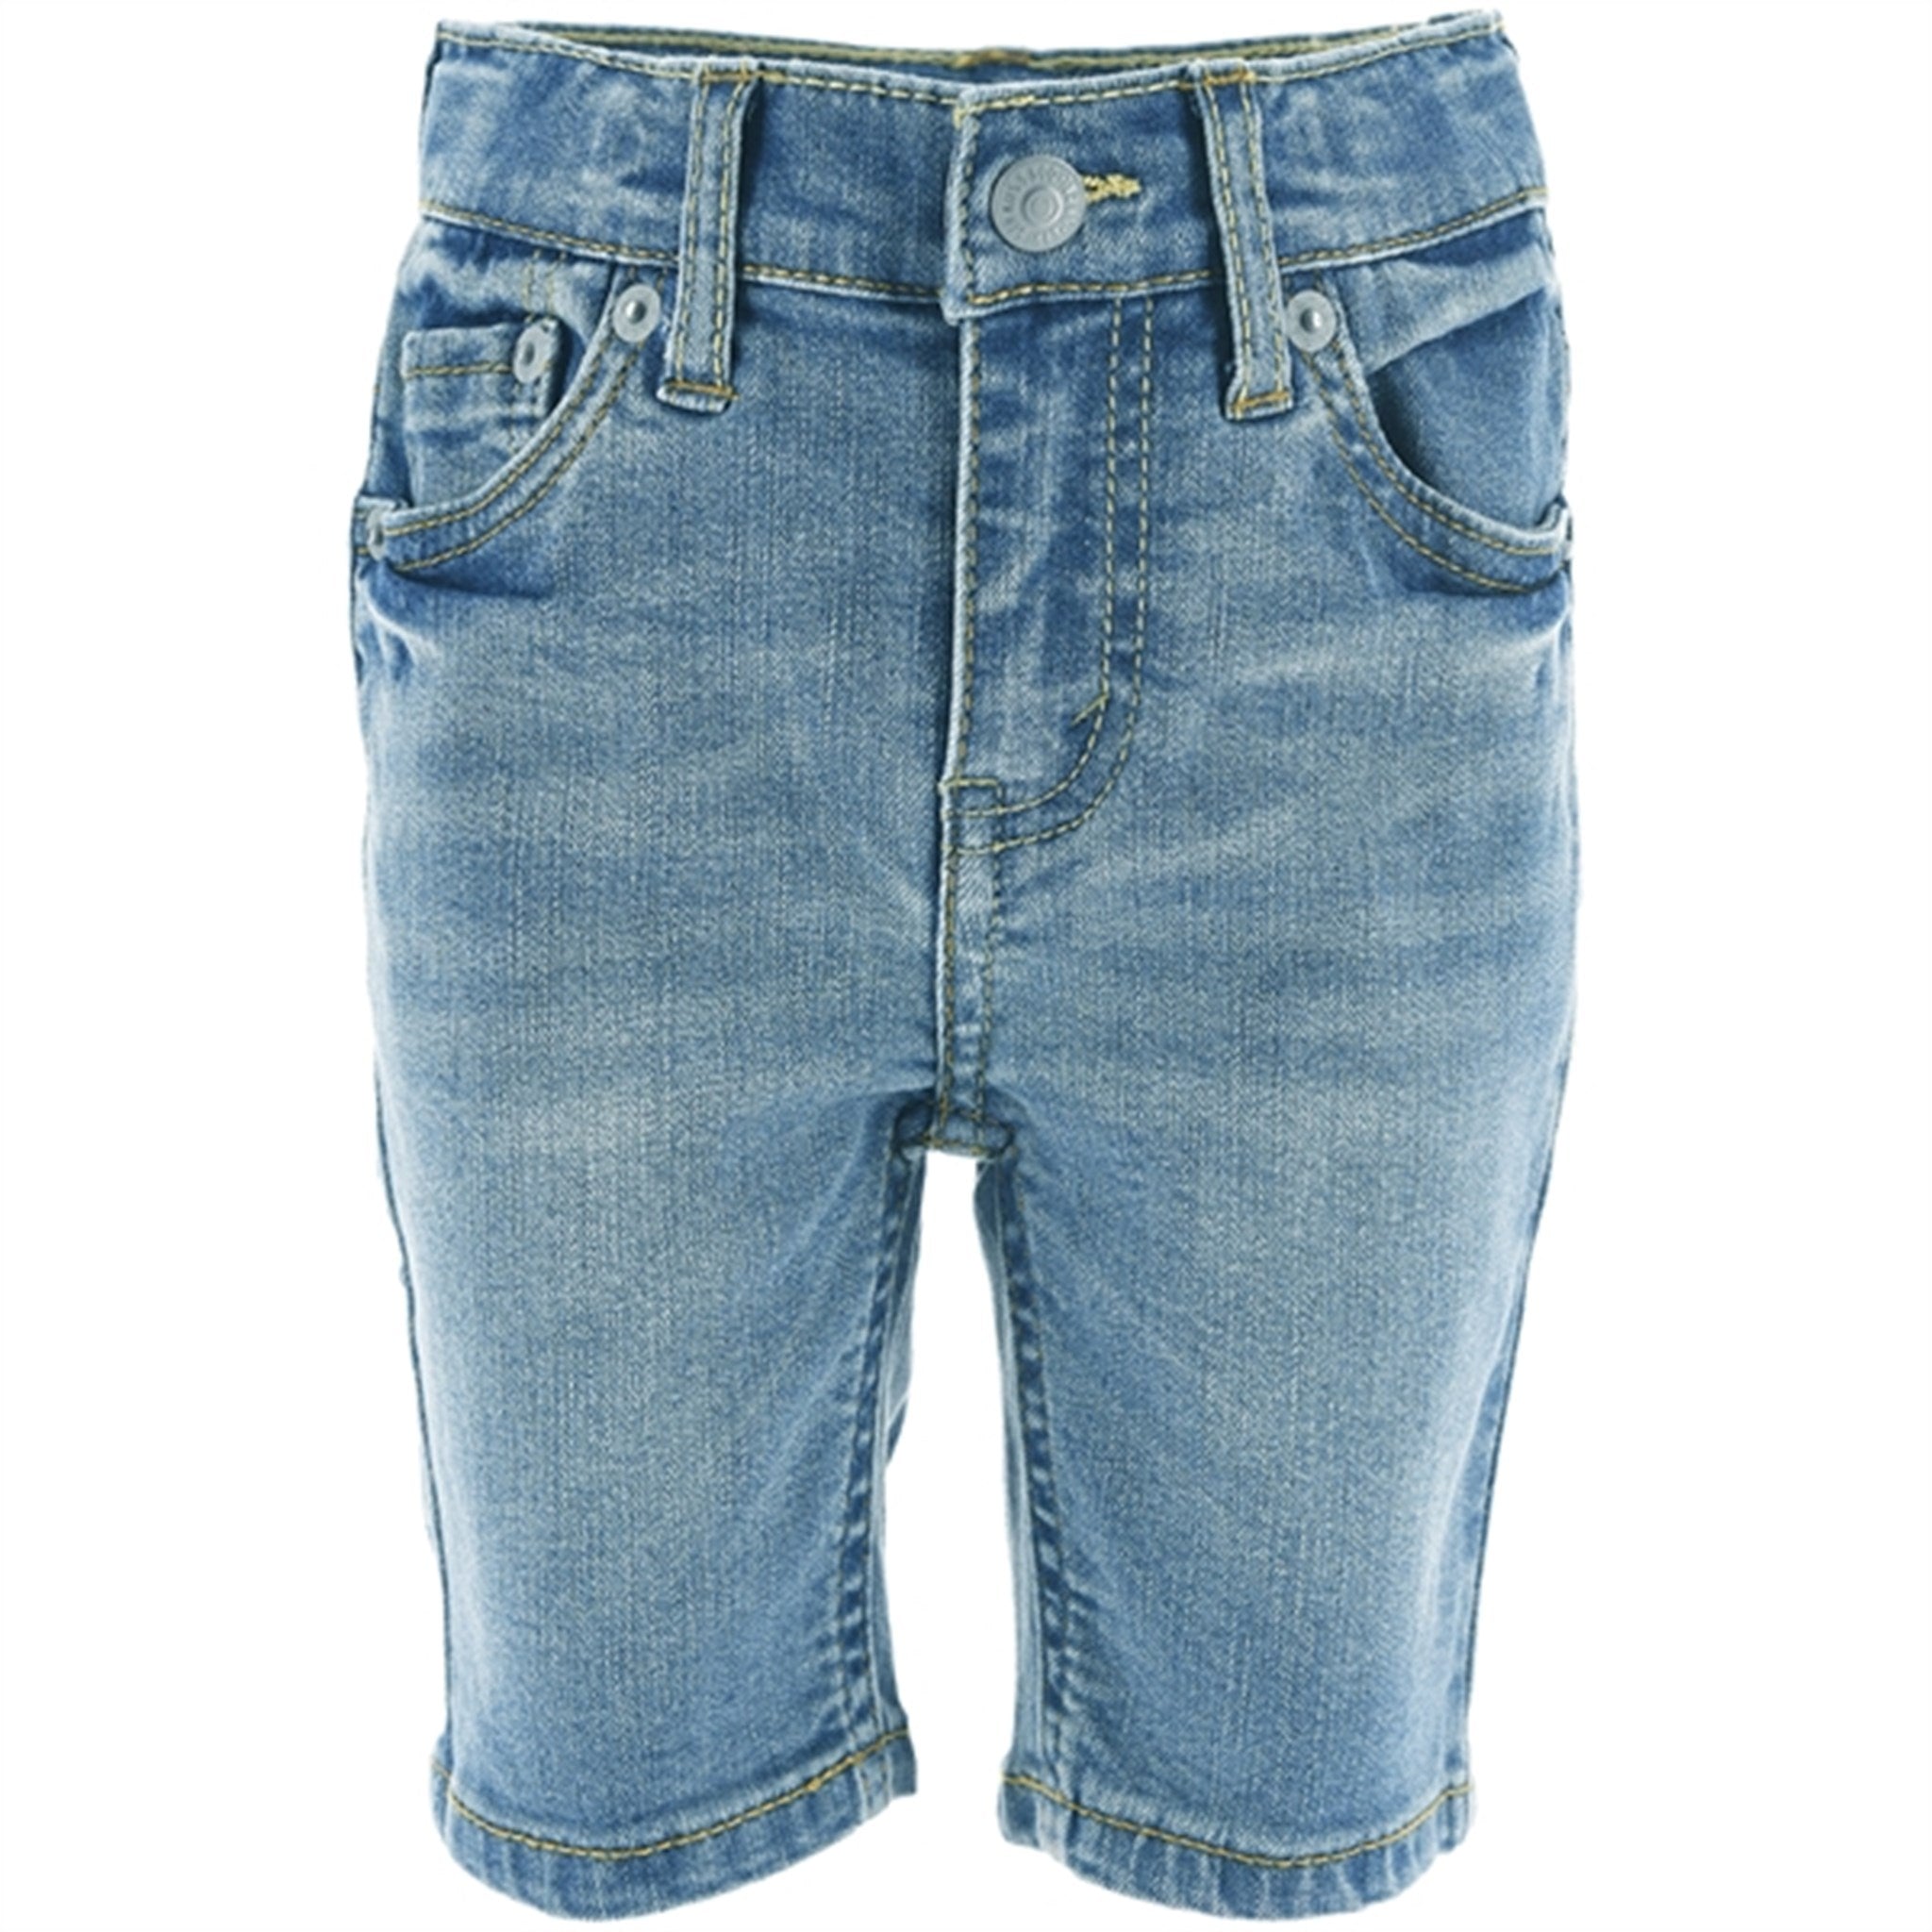 Levi's Shorts 510 Embroidered Hydra 4